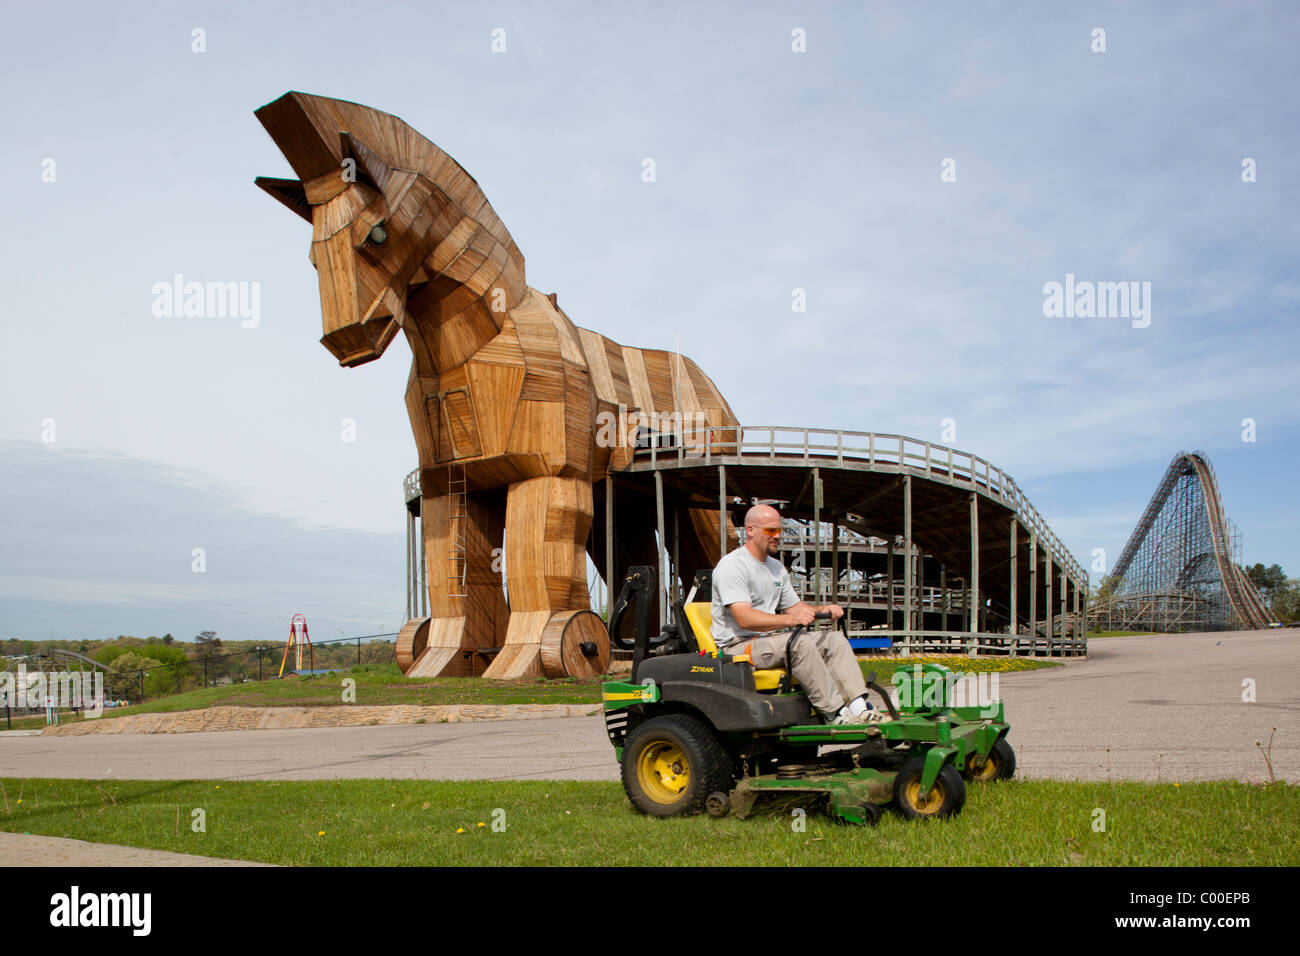 USA, Wisconsin, Wisconsin Dells, Maintenance worker drives lawn mower past Replica of Trojan Horse at Mt. Olympus Amusement Park Stock Photo